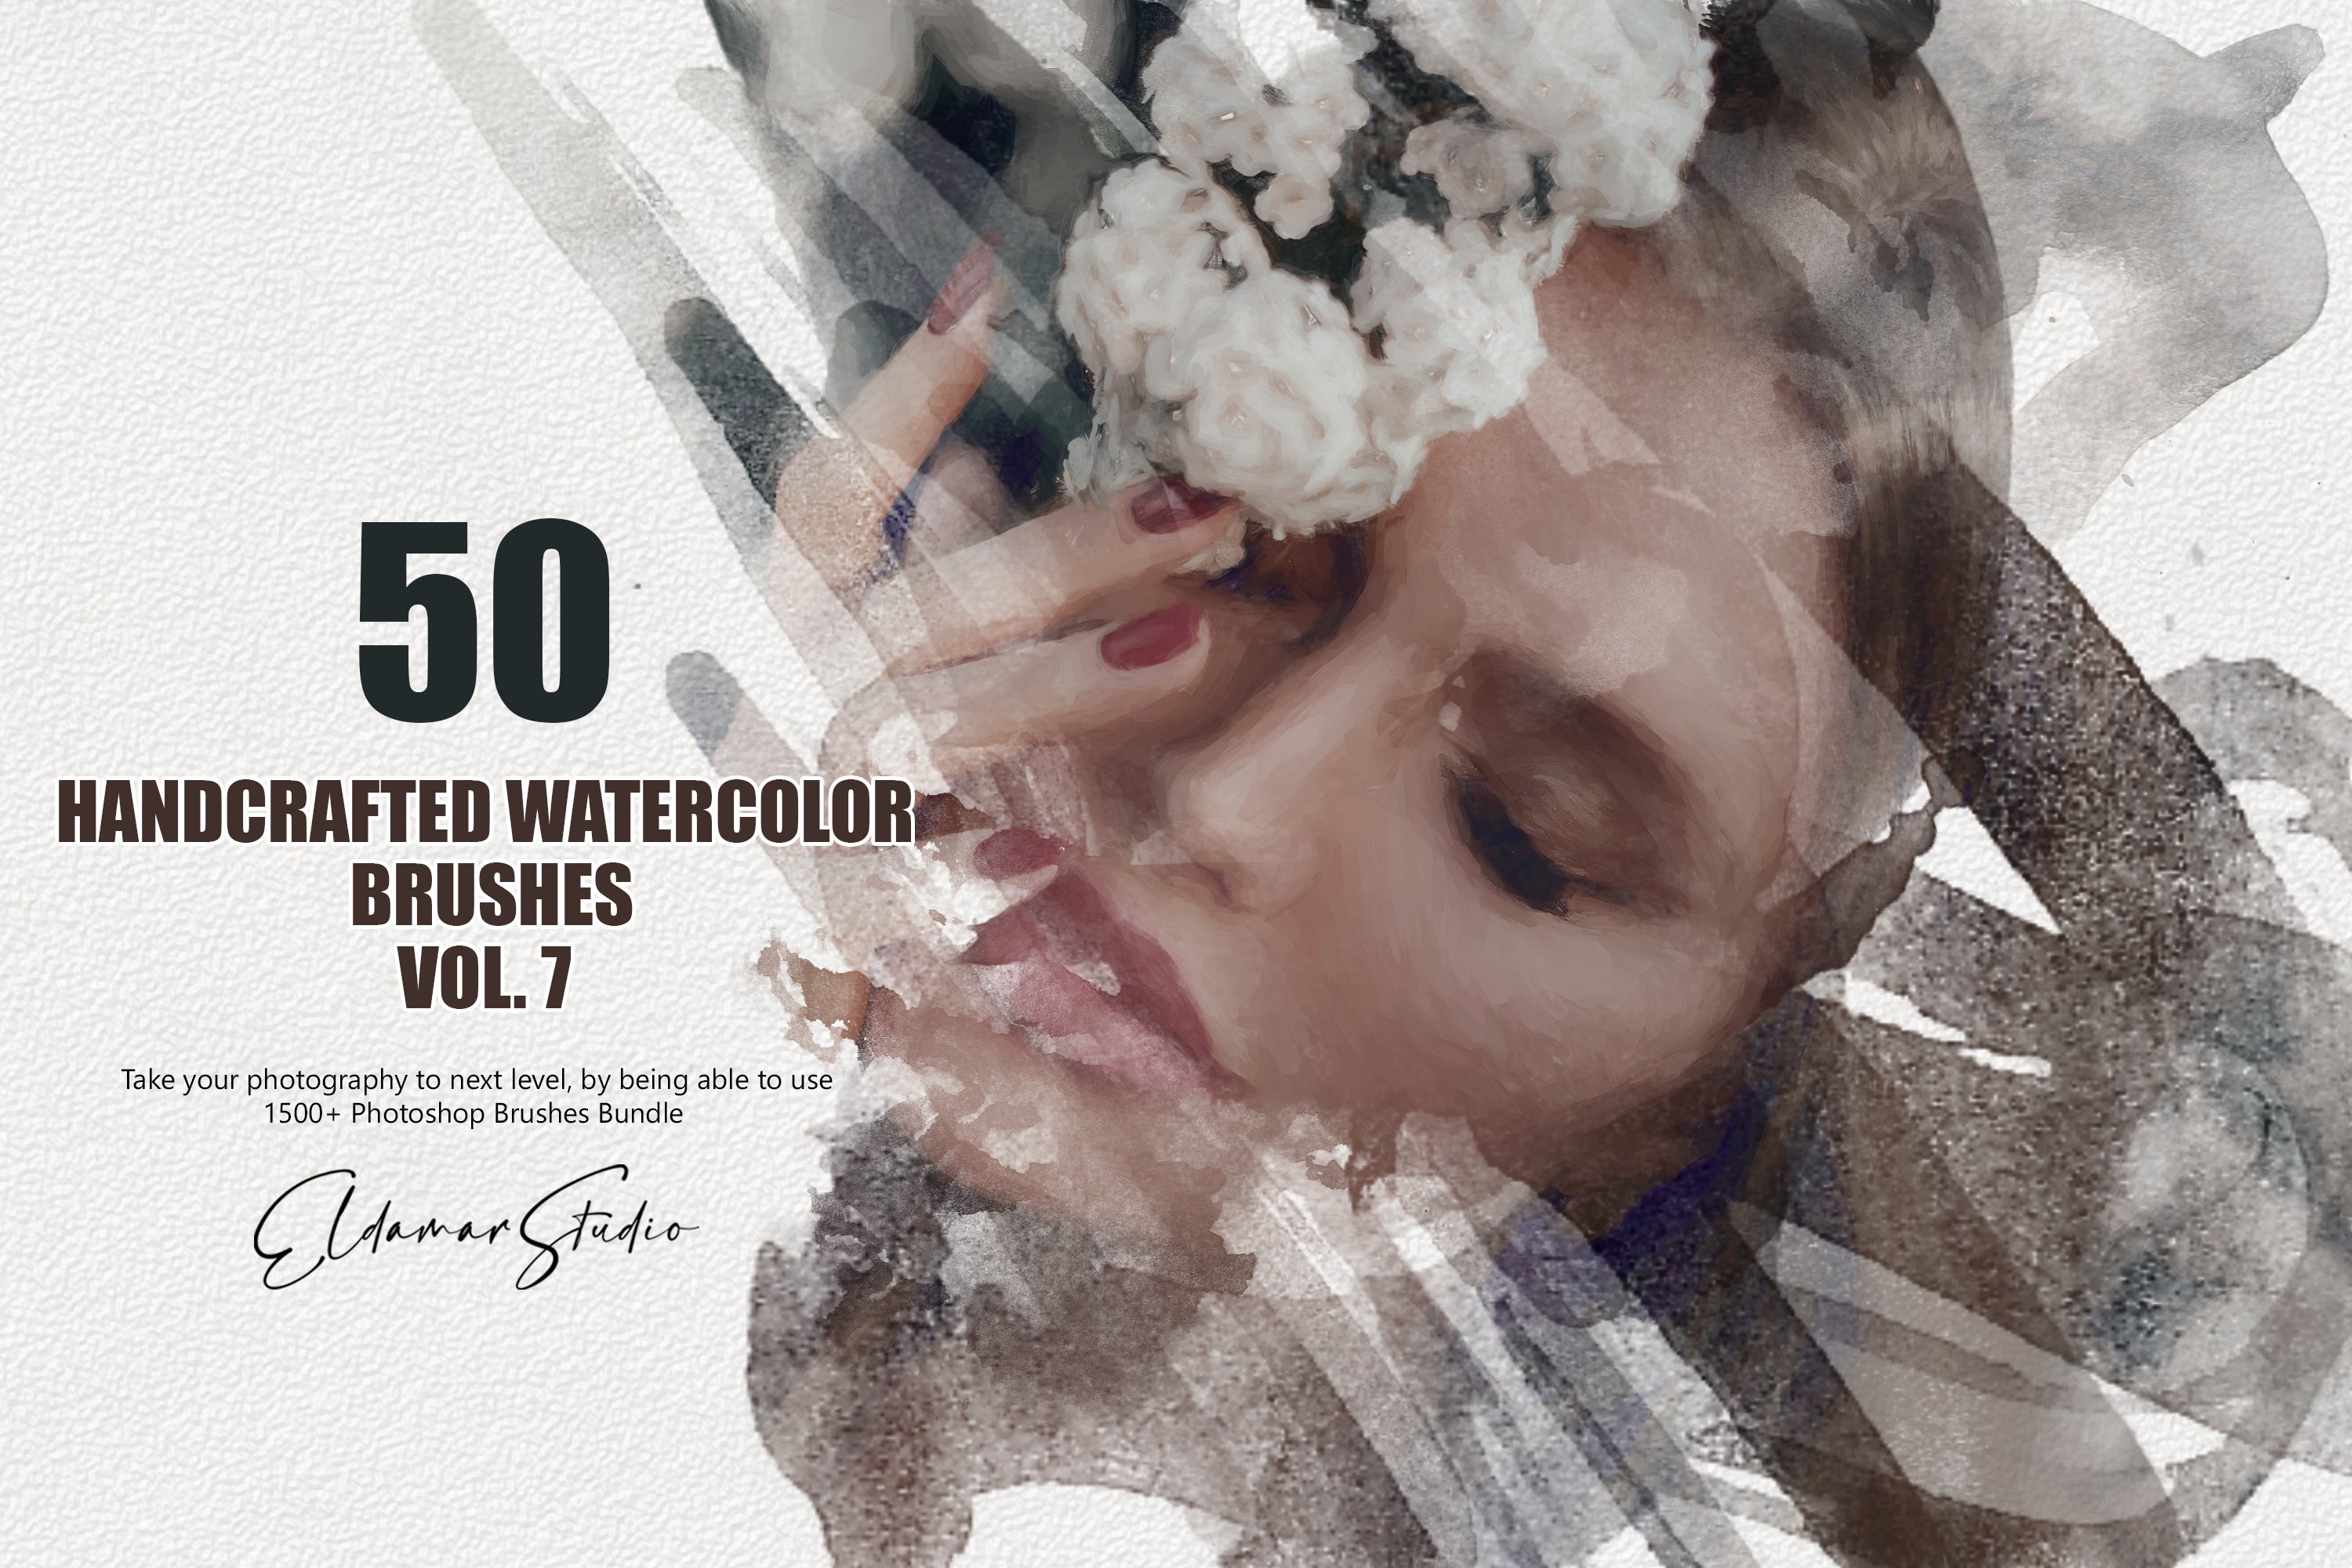 50 Handcrafted Watercolor Brushes 7cover image.